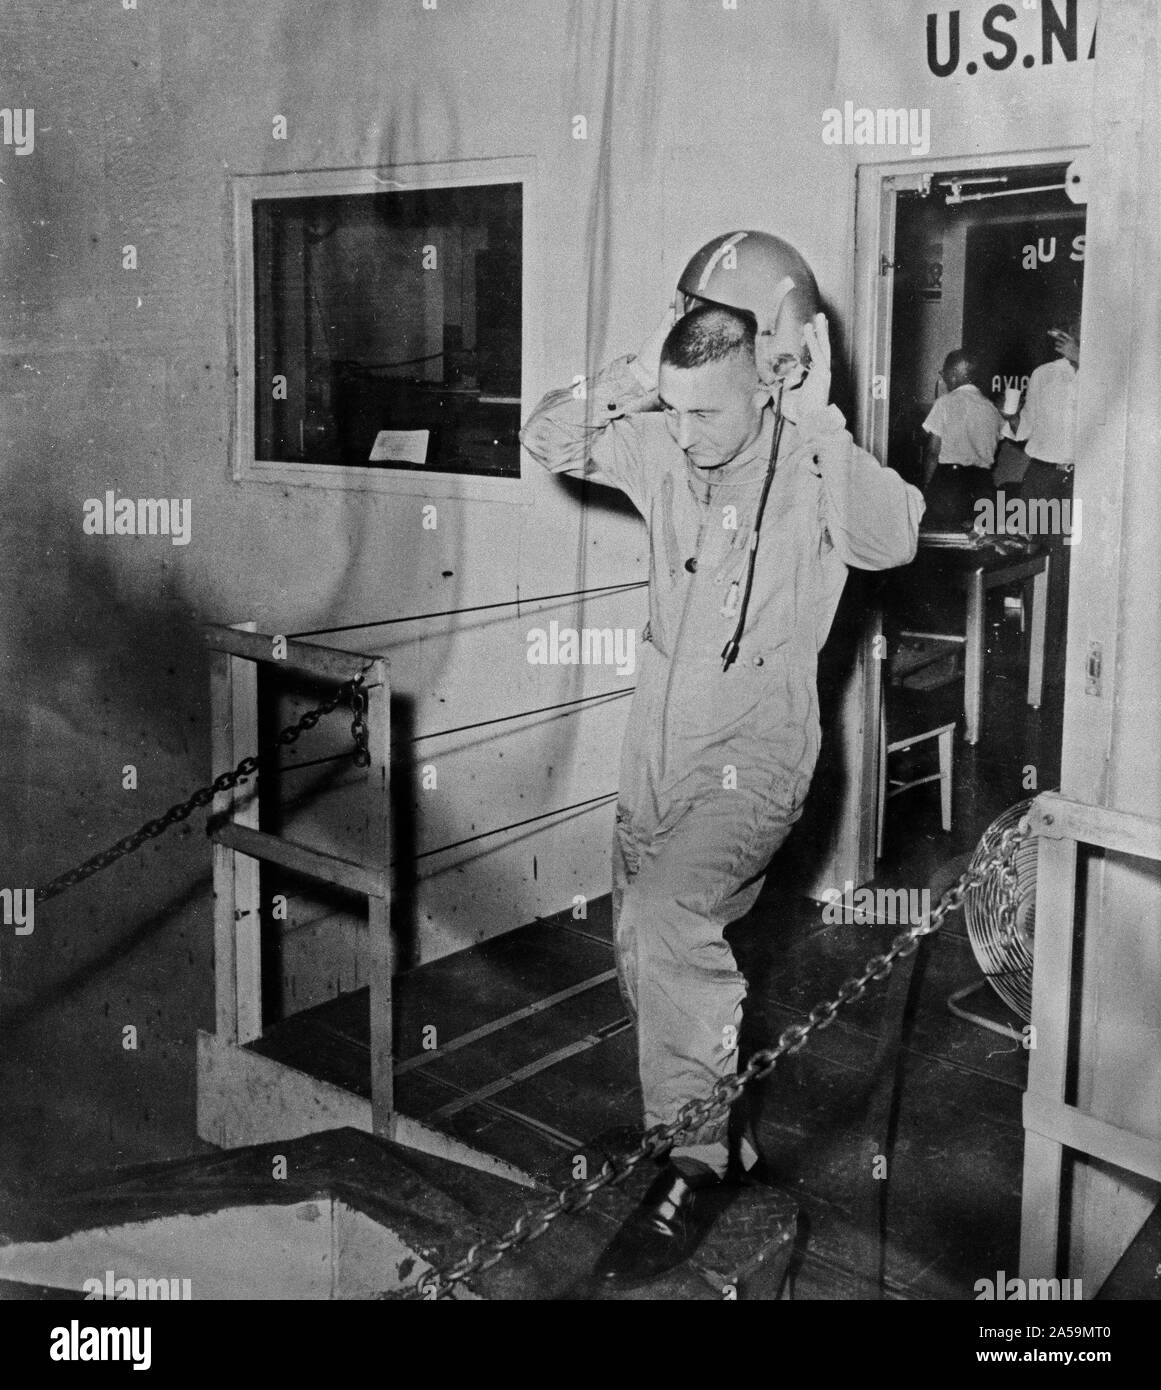 (1959) --- Astronaut Virgil (Gus) Grissom is pictured leaving a U.S. Navy installation and removing his helmet. Stock Photo